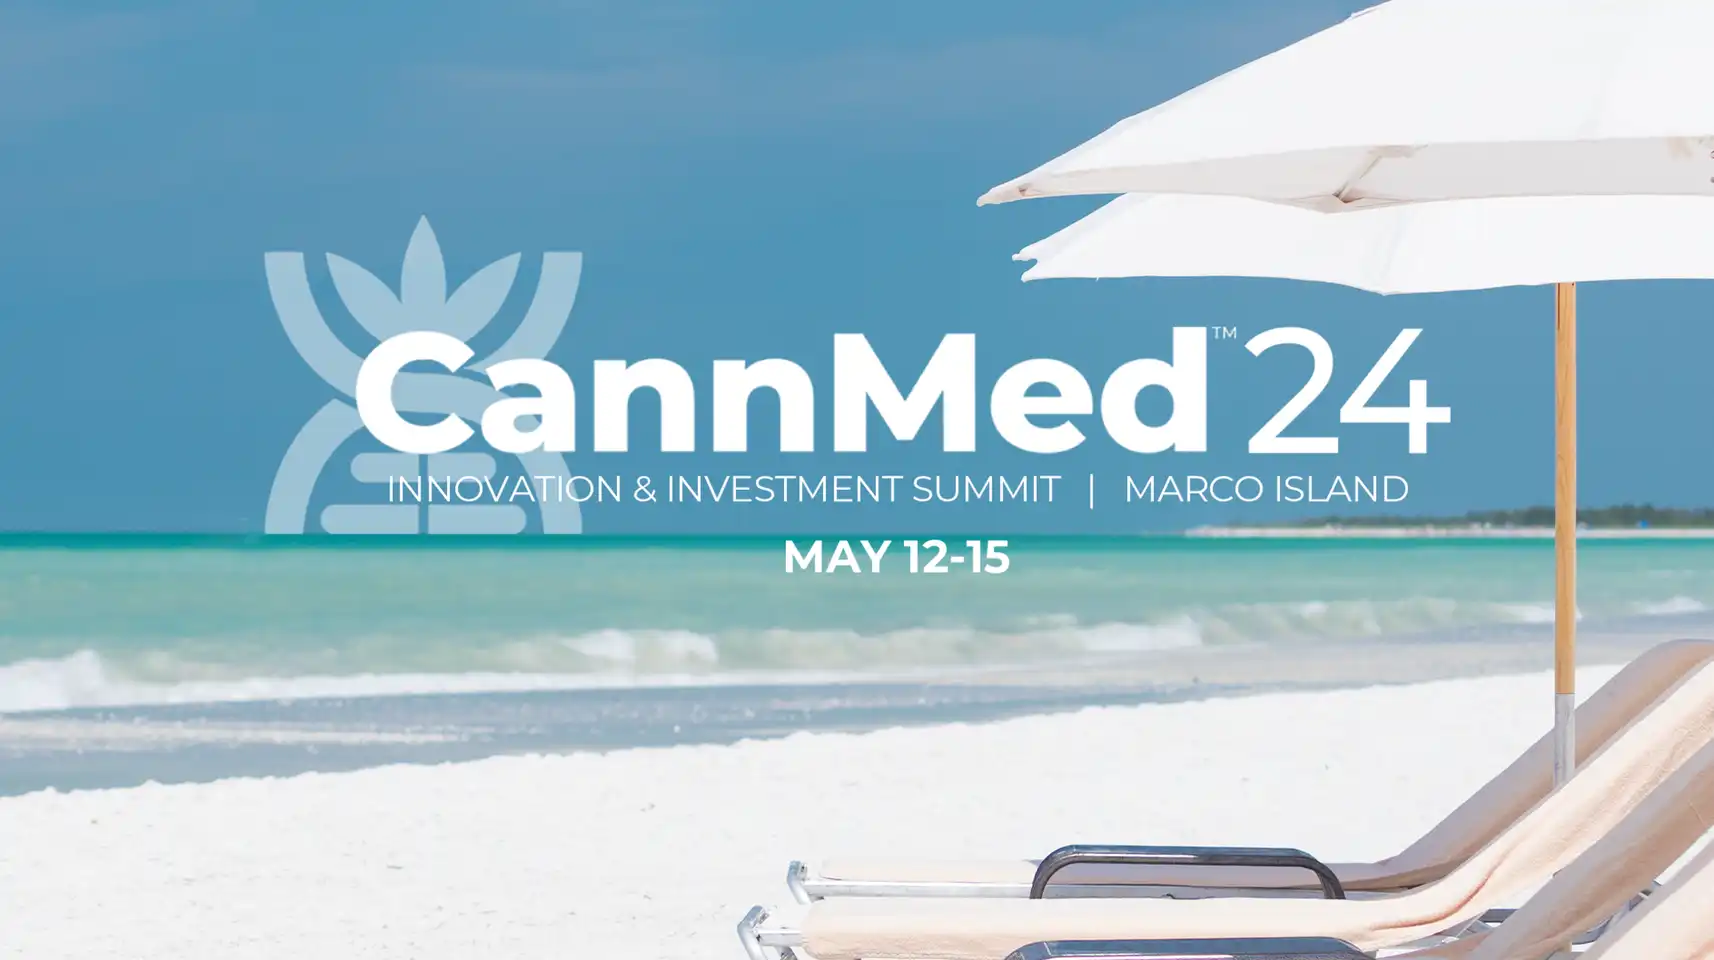  CannMed 24